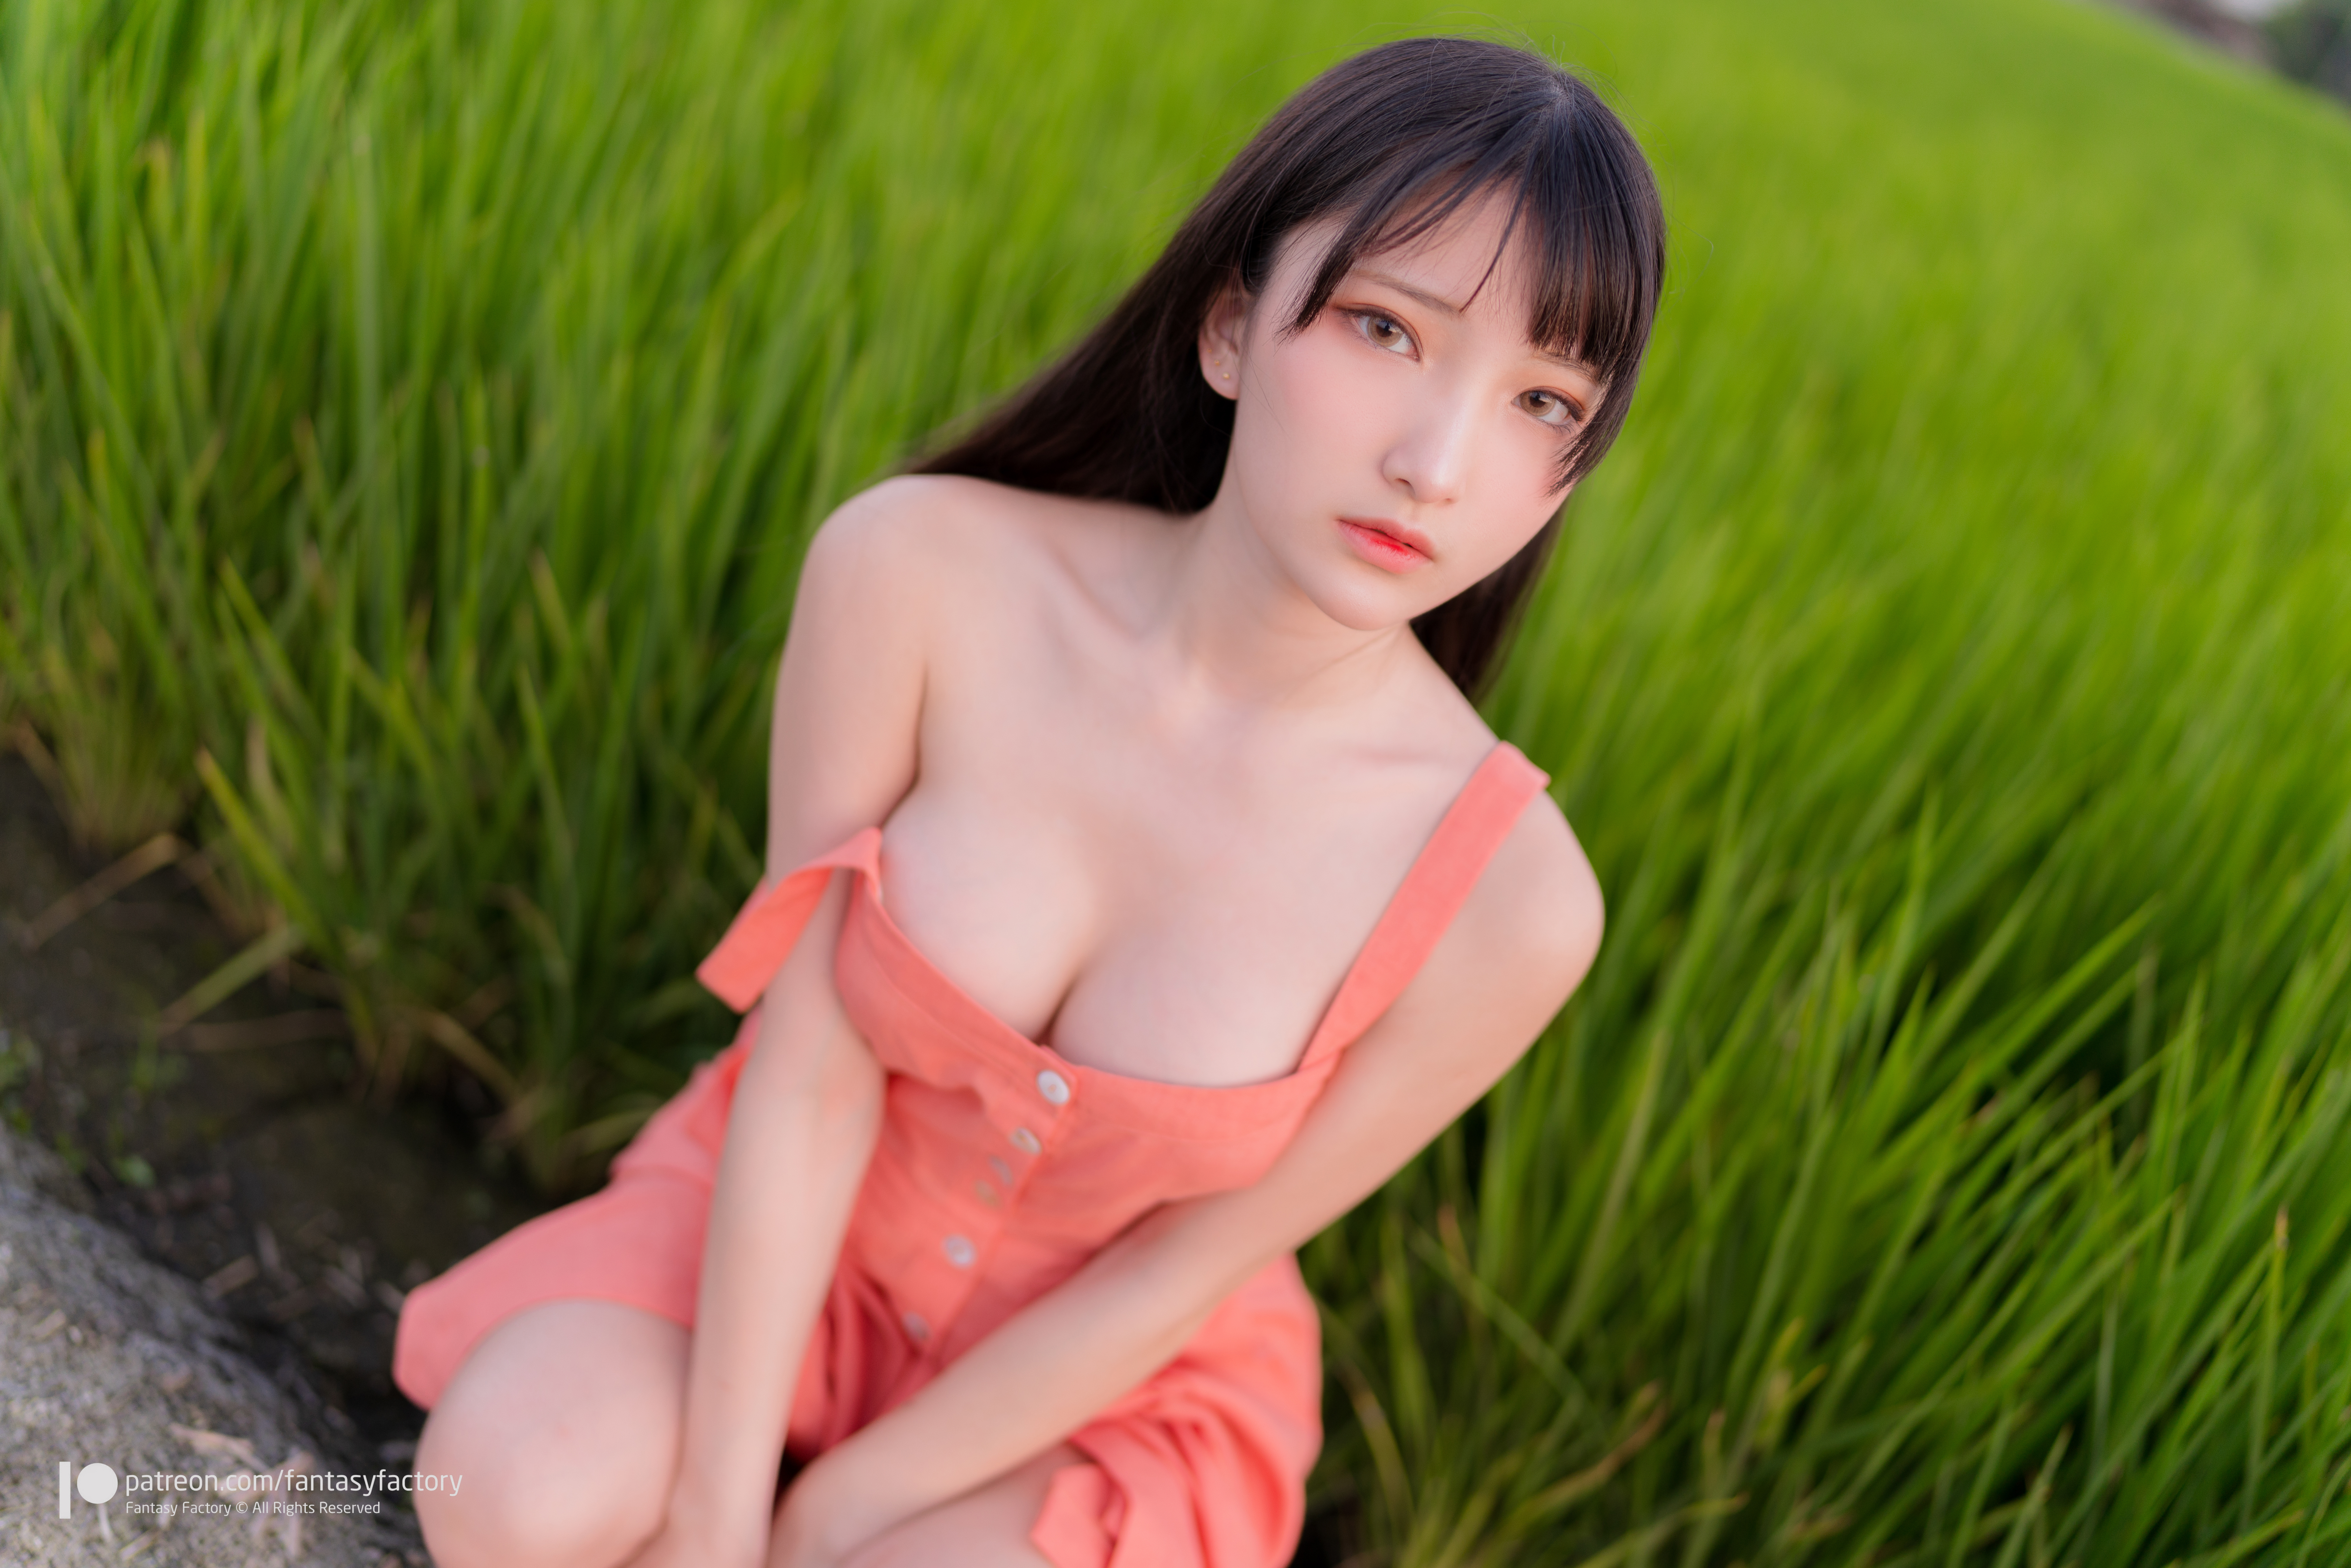 People 7952x5304 women model Asian brunette bangs dress looking at viewer cleavage bare shoulders no bra squatting rice fields bokeh outdoors women outdoors parted lips Fantasy Factory